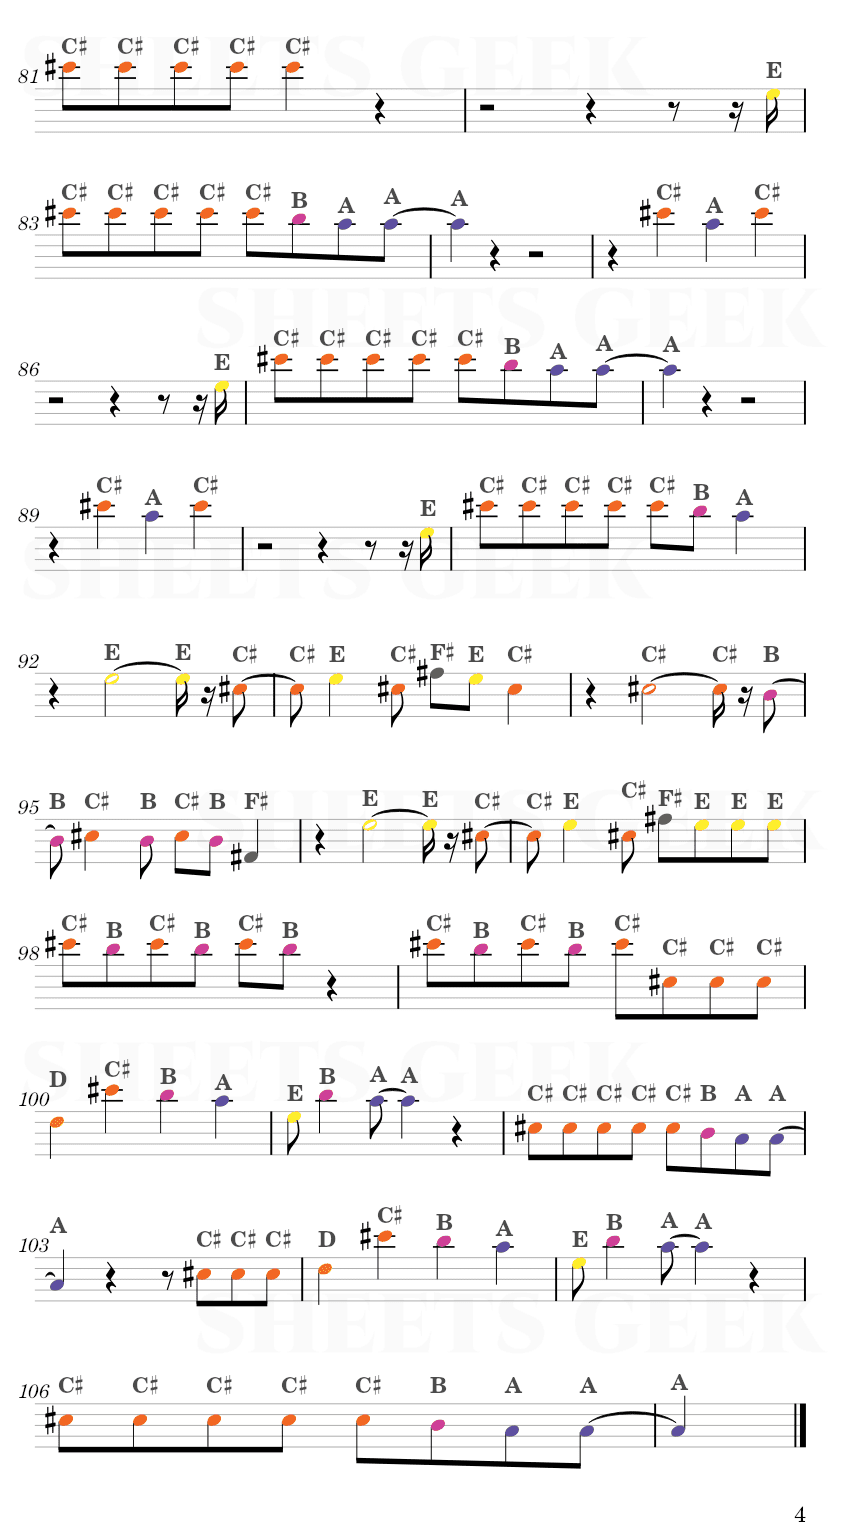 Dont Know What To Do - BLACKPINK Easy Sheet Music Free for piano, keyboard, flute, violin, sax, cello page 4